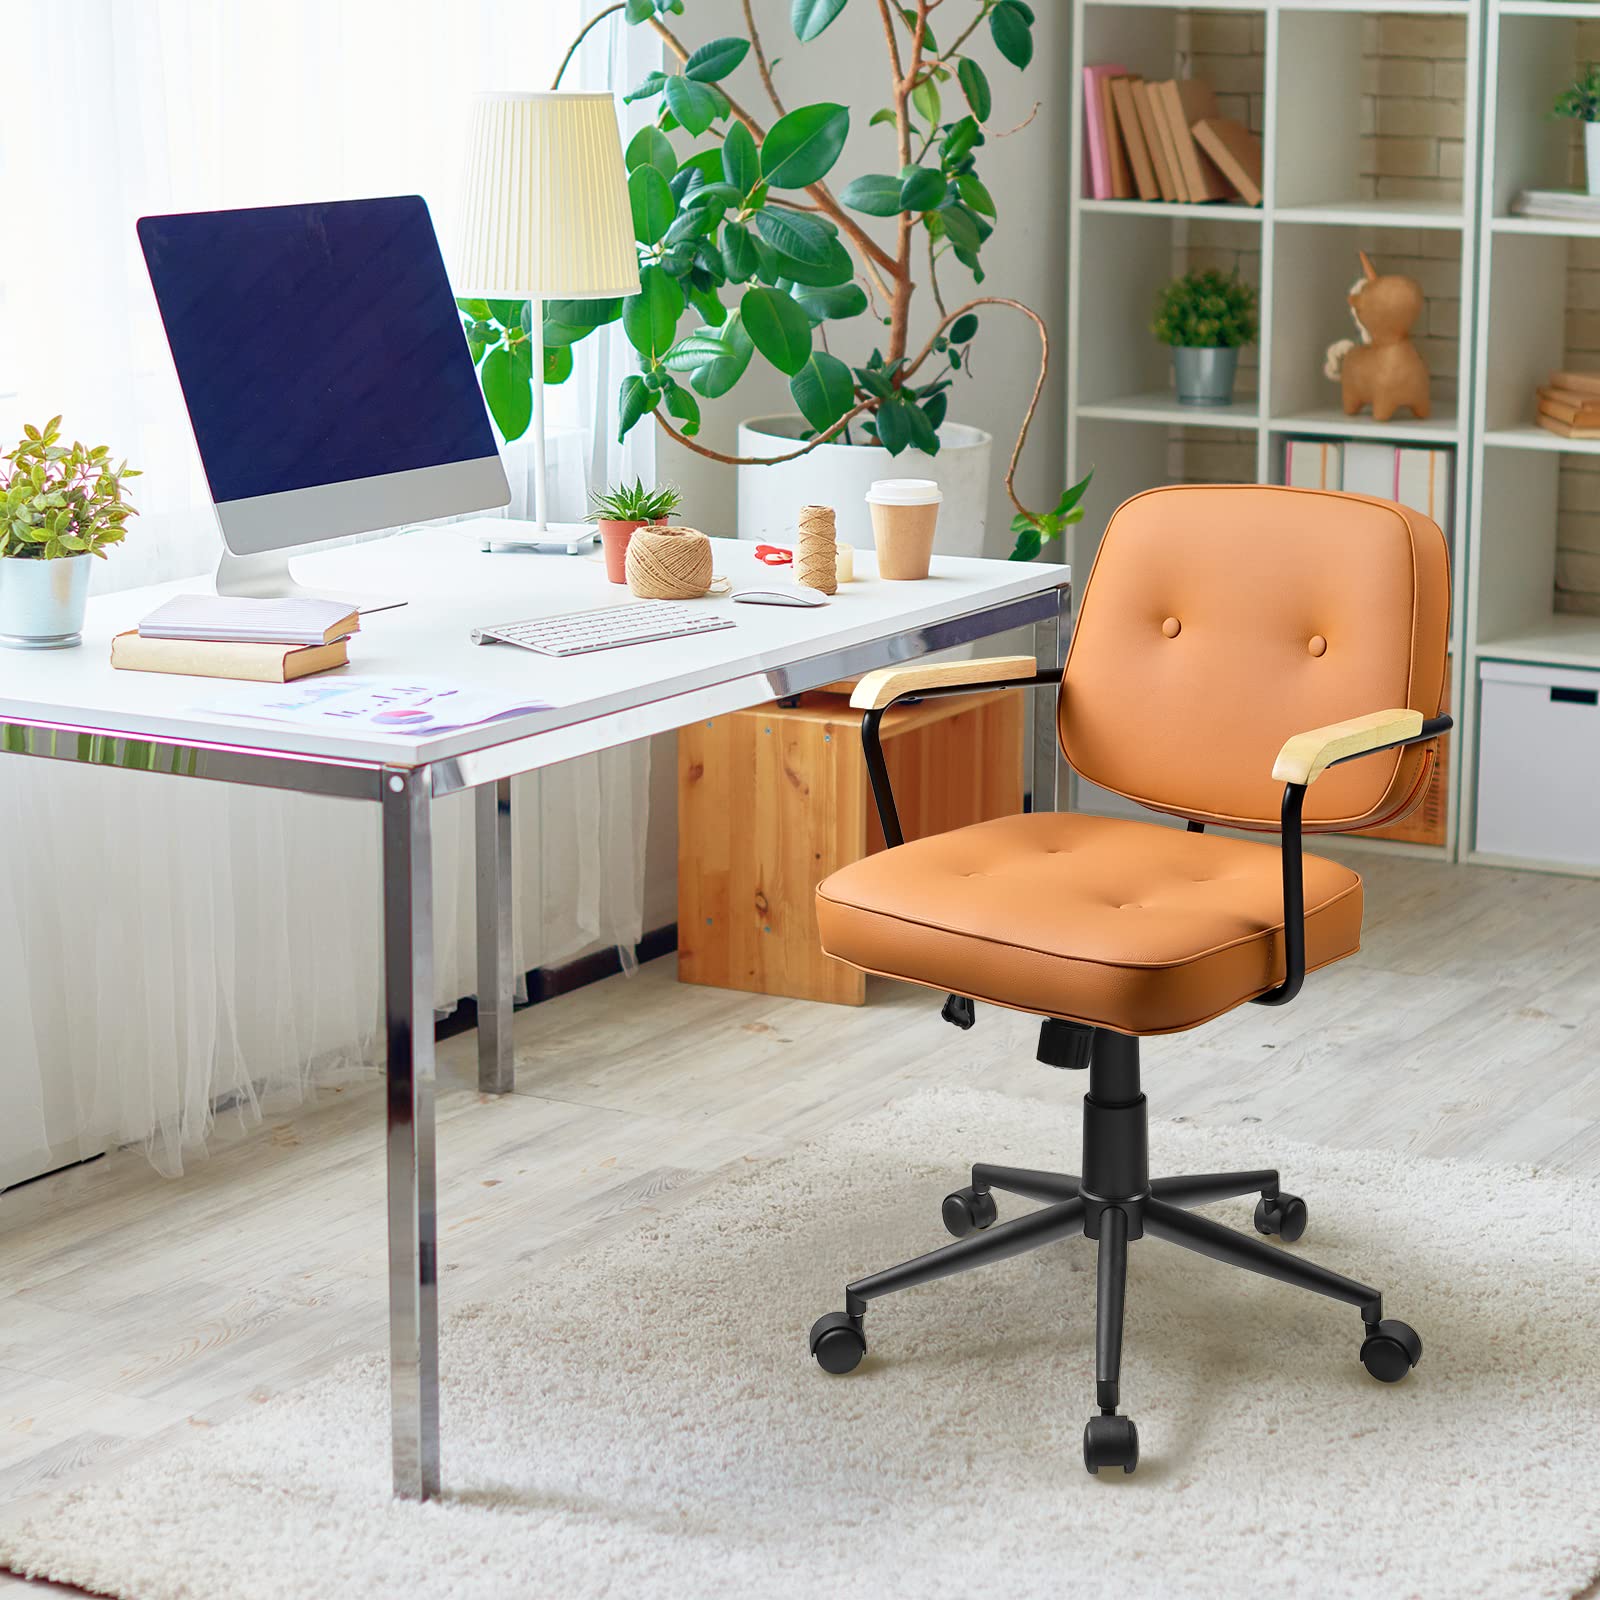 Giantex Home Office Chair, Height Adjustable PU Leather Desk Chair w/Rocking Backrest, Orange